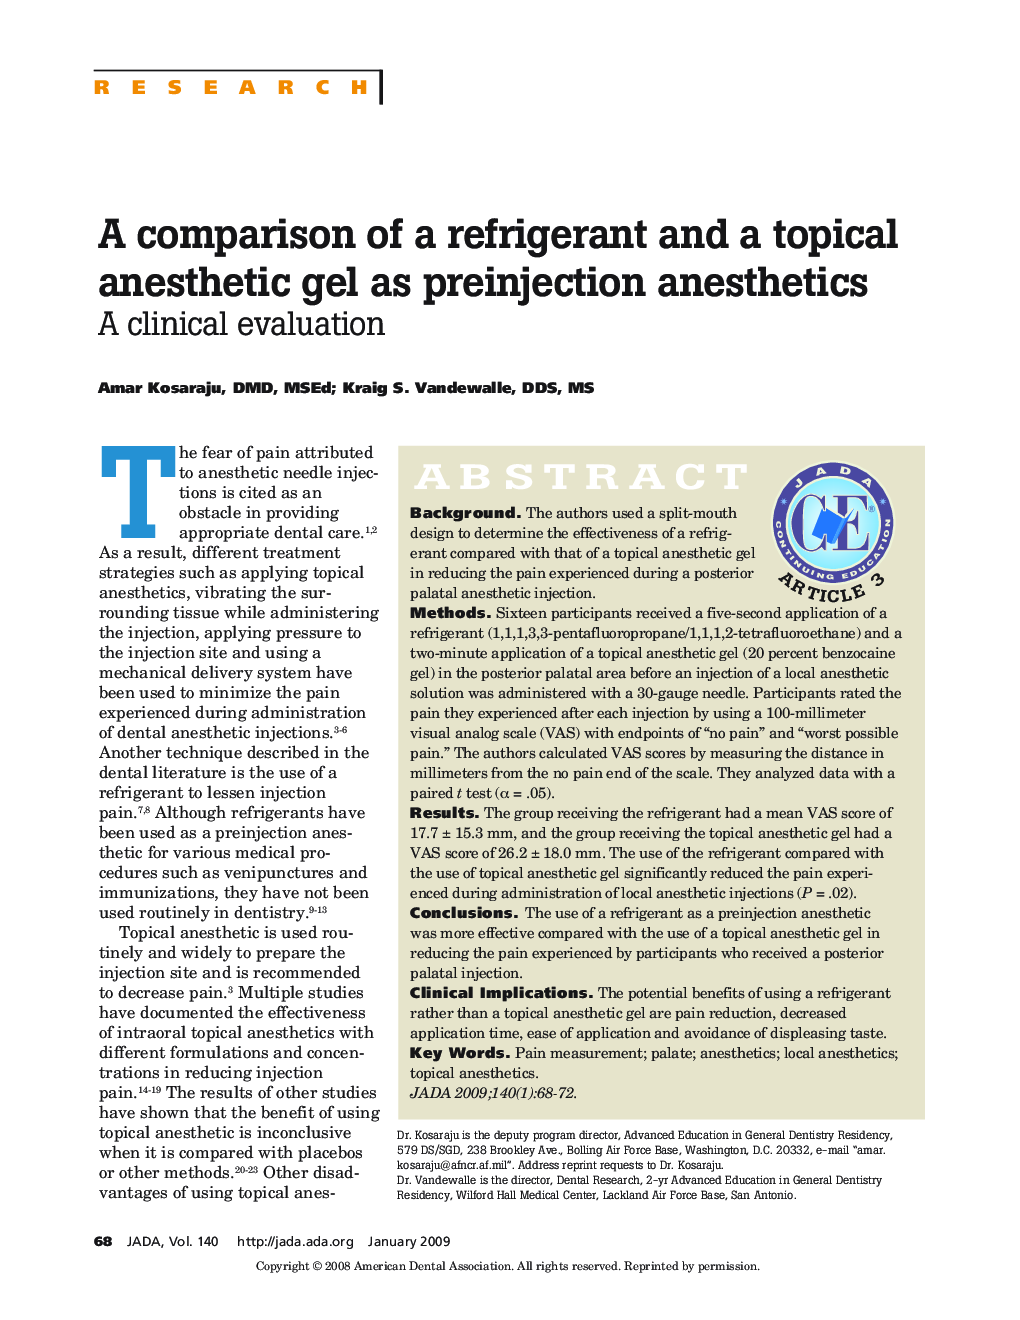 A comparison of a refrigerant and a topical anesthetic gel as preinjection anesthetics : A clinical evaluation